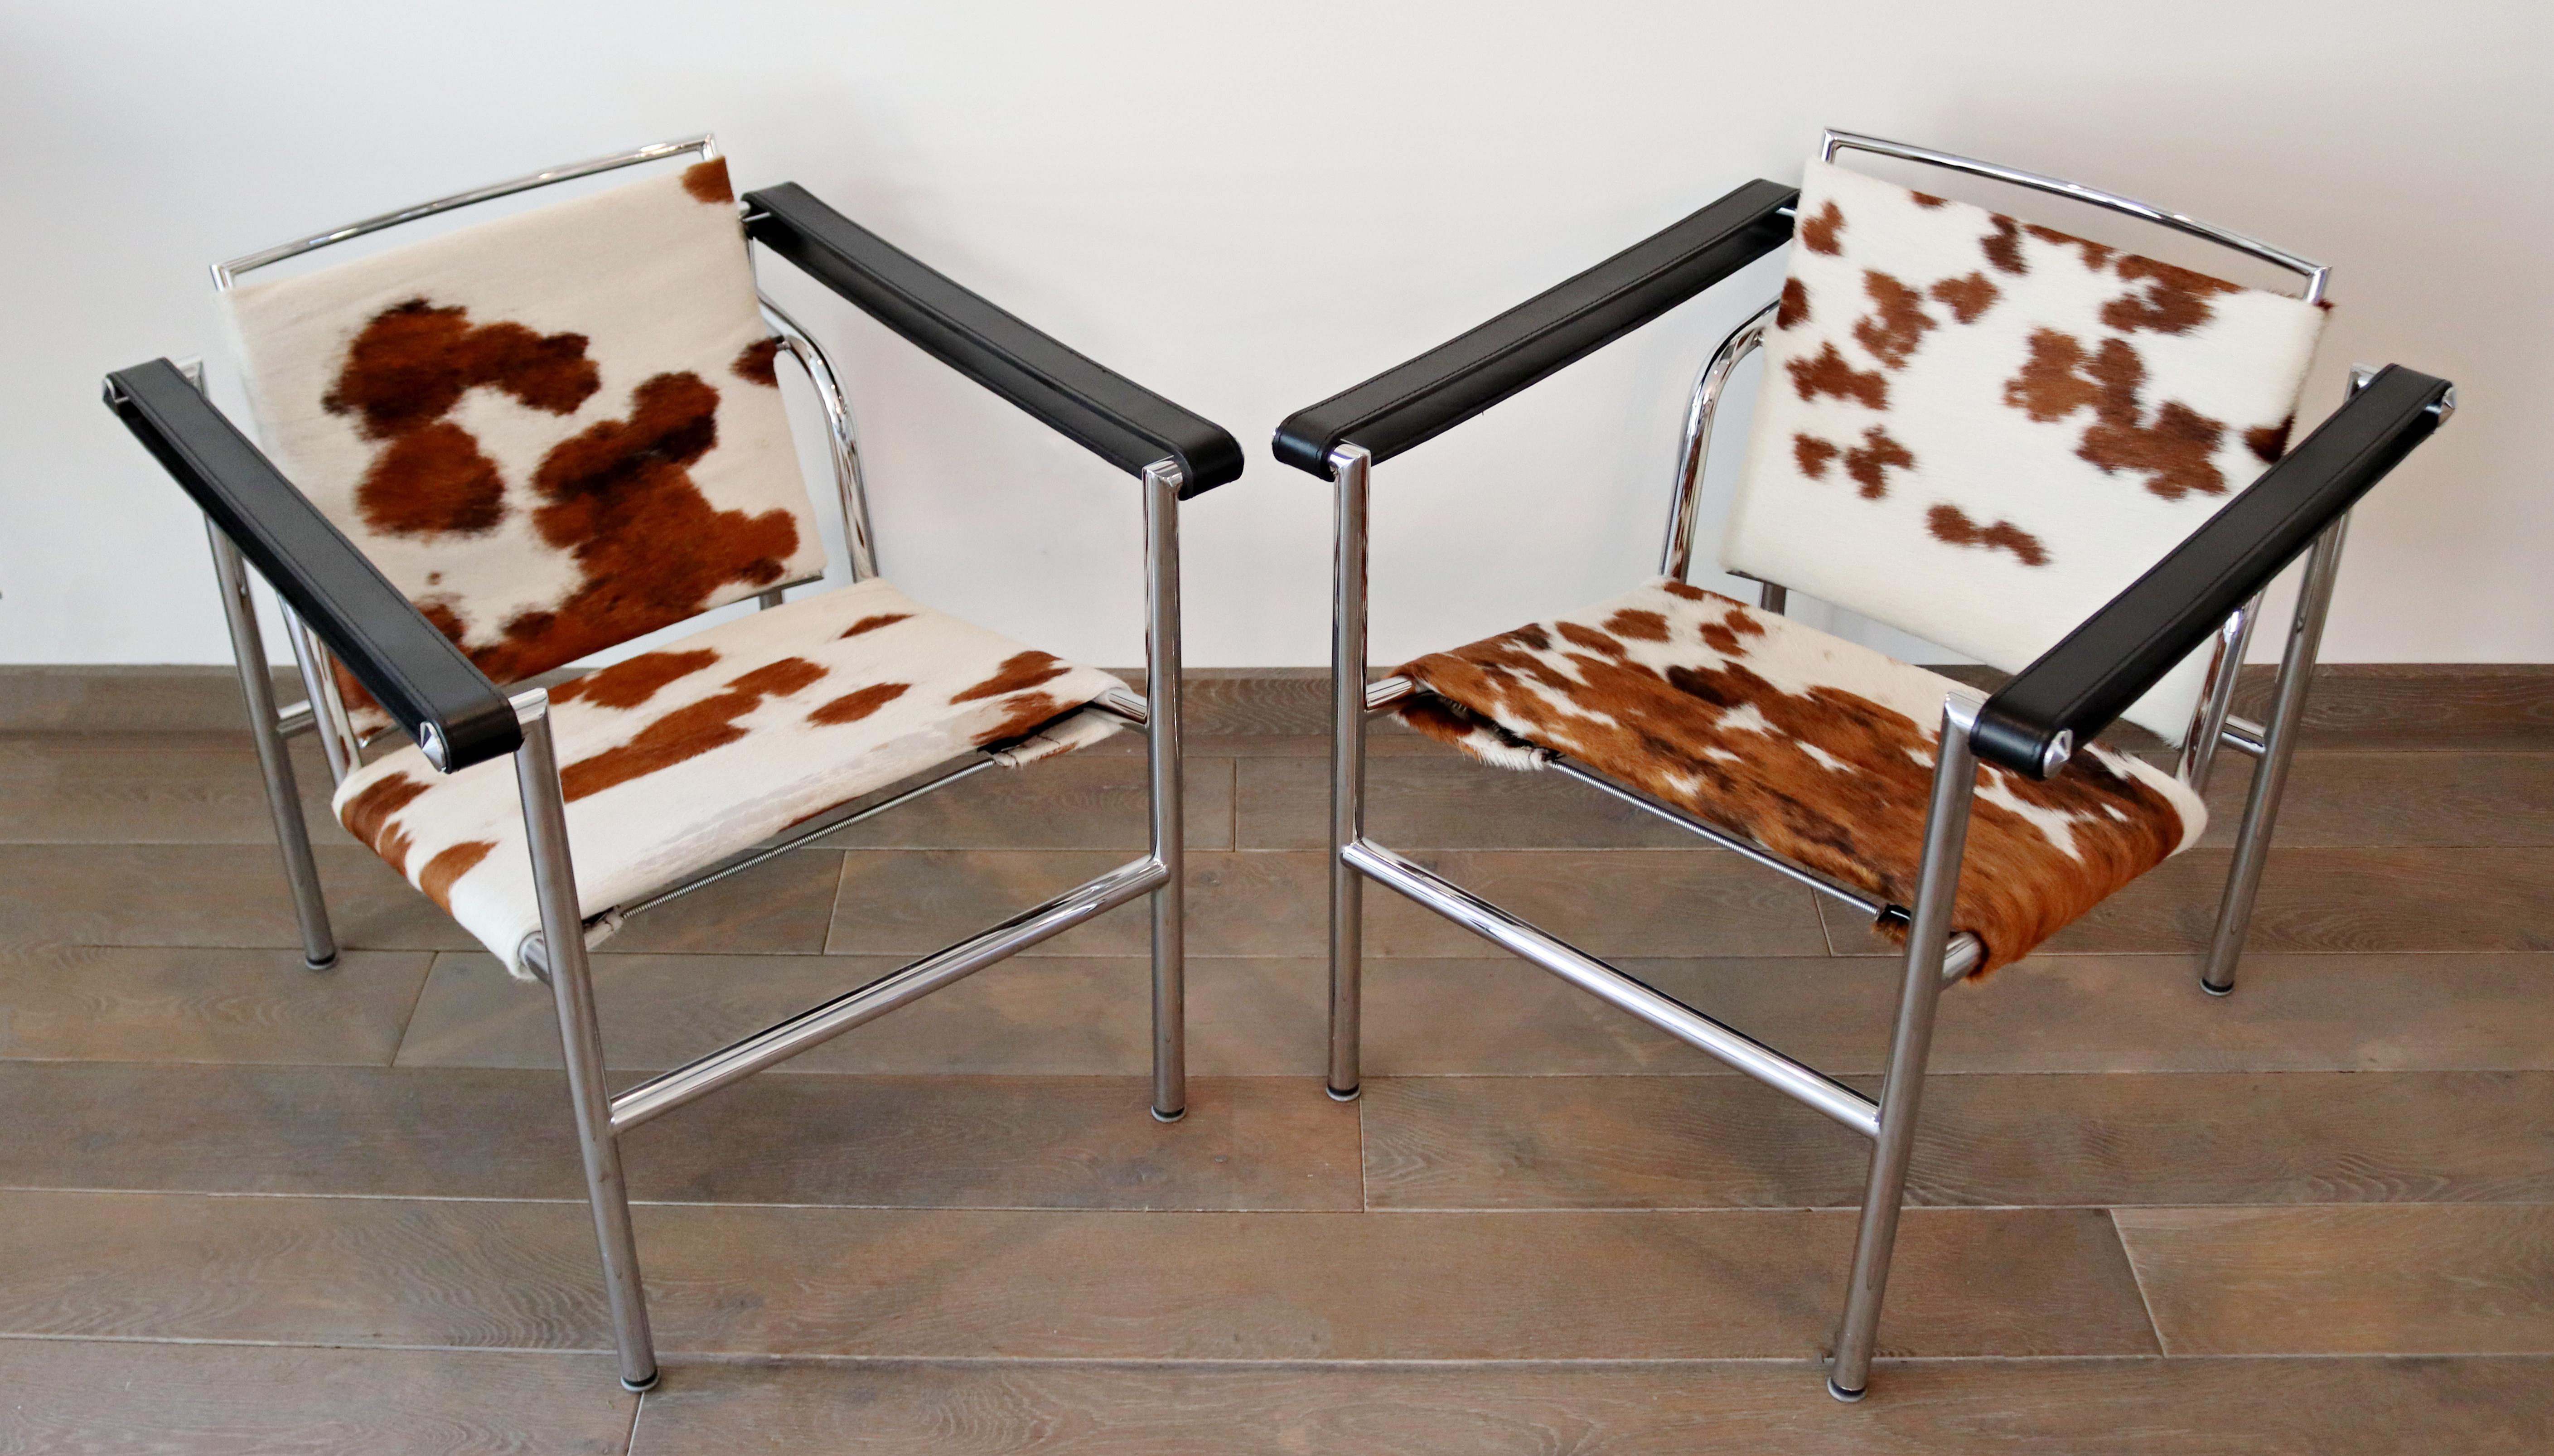 For your consideration is an incredible pair of Corbusier style, pony hair on chrome, adjustable accent chairs. In very good condition, with some of the hair rubbed away due to age. The dimensions are 23